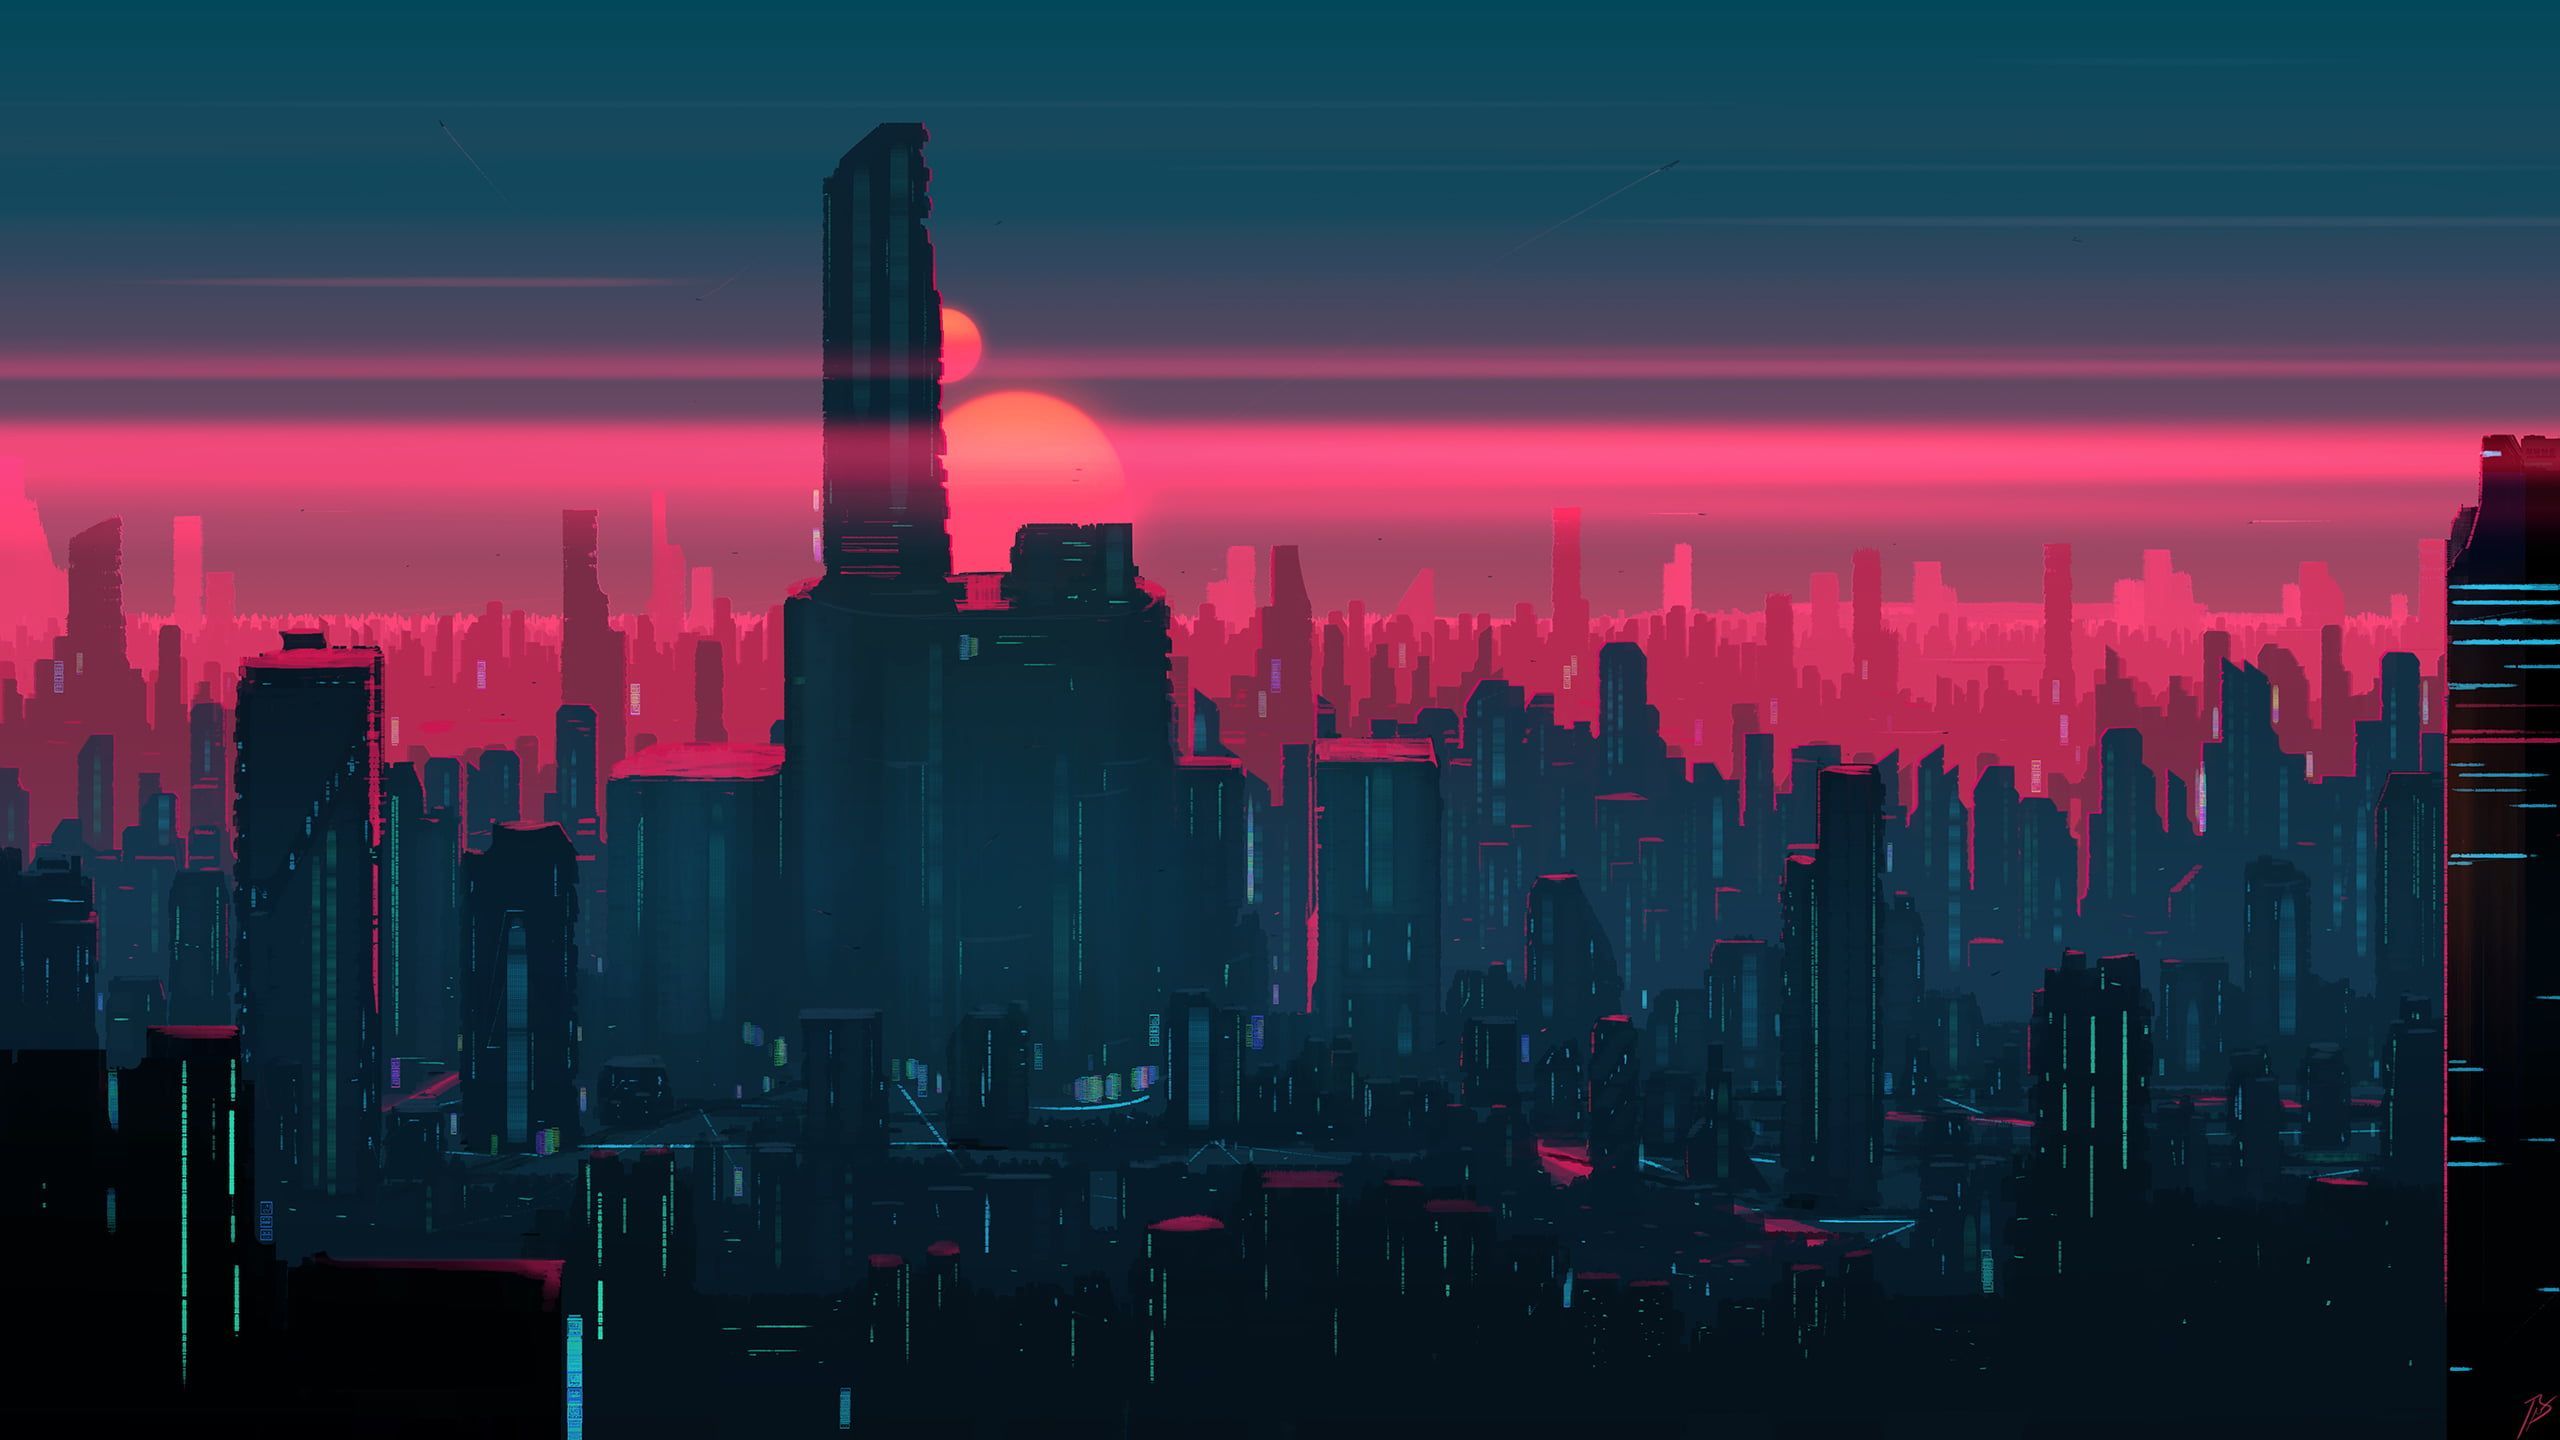 Cityscape Artwork In Sunset Wallpapers